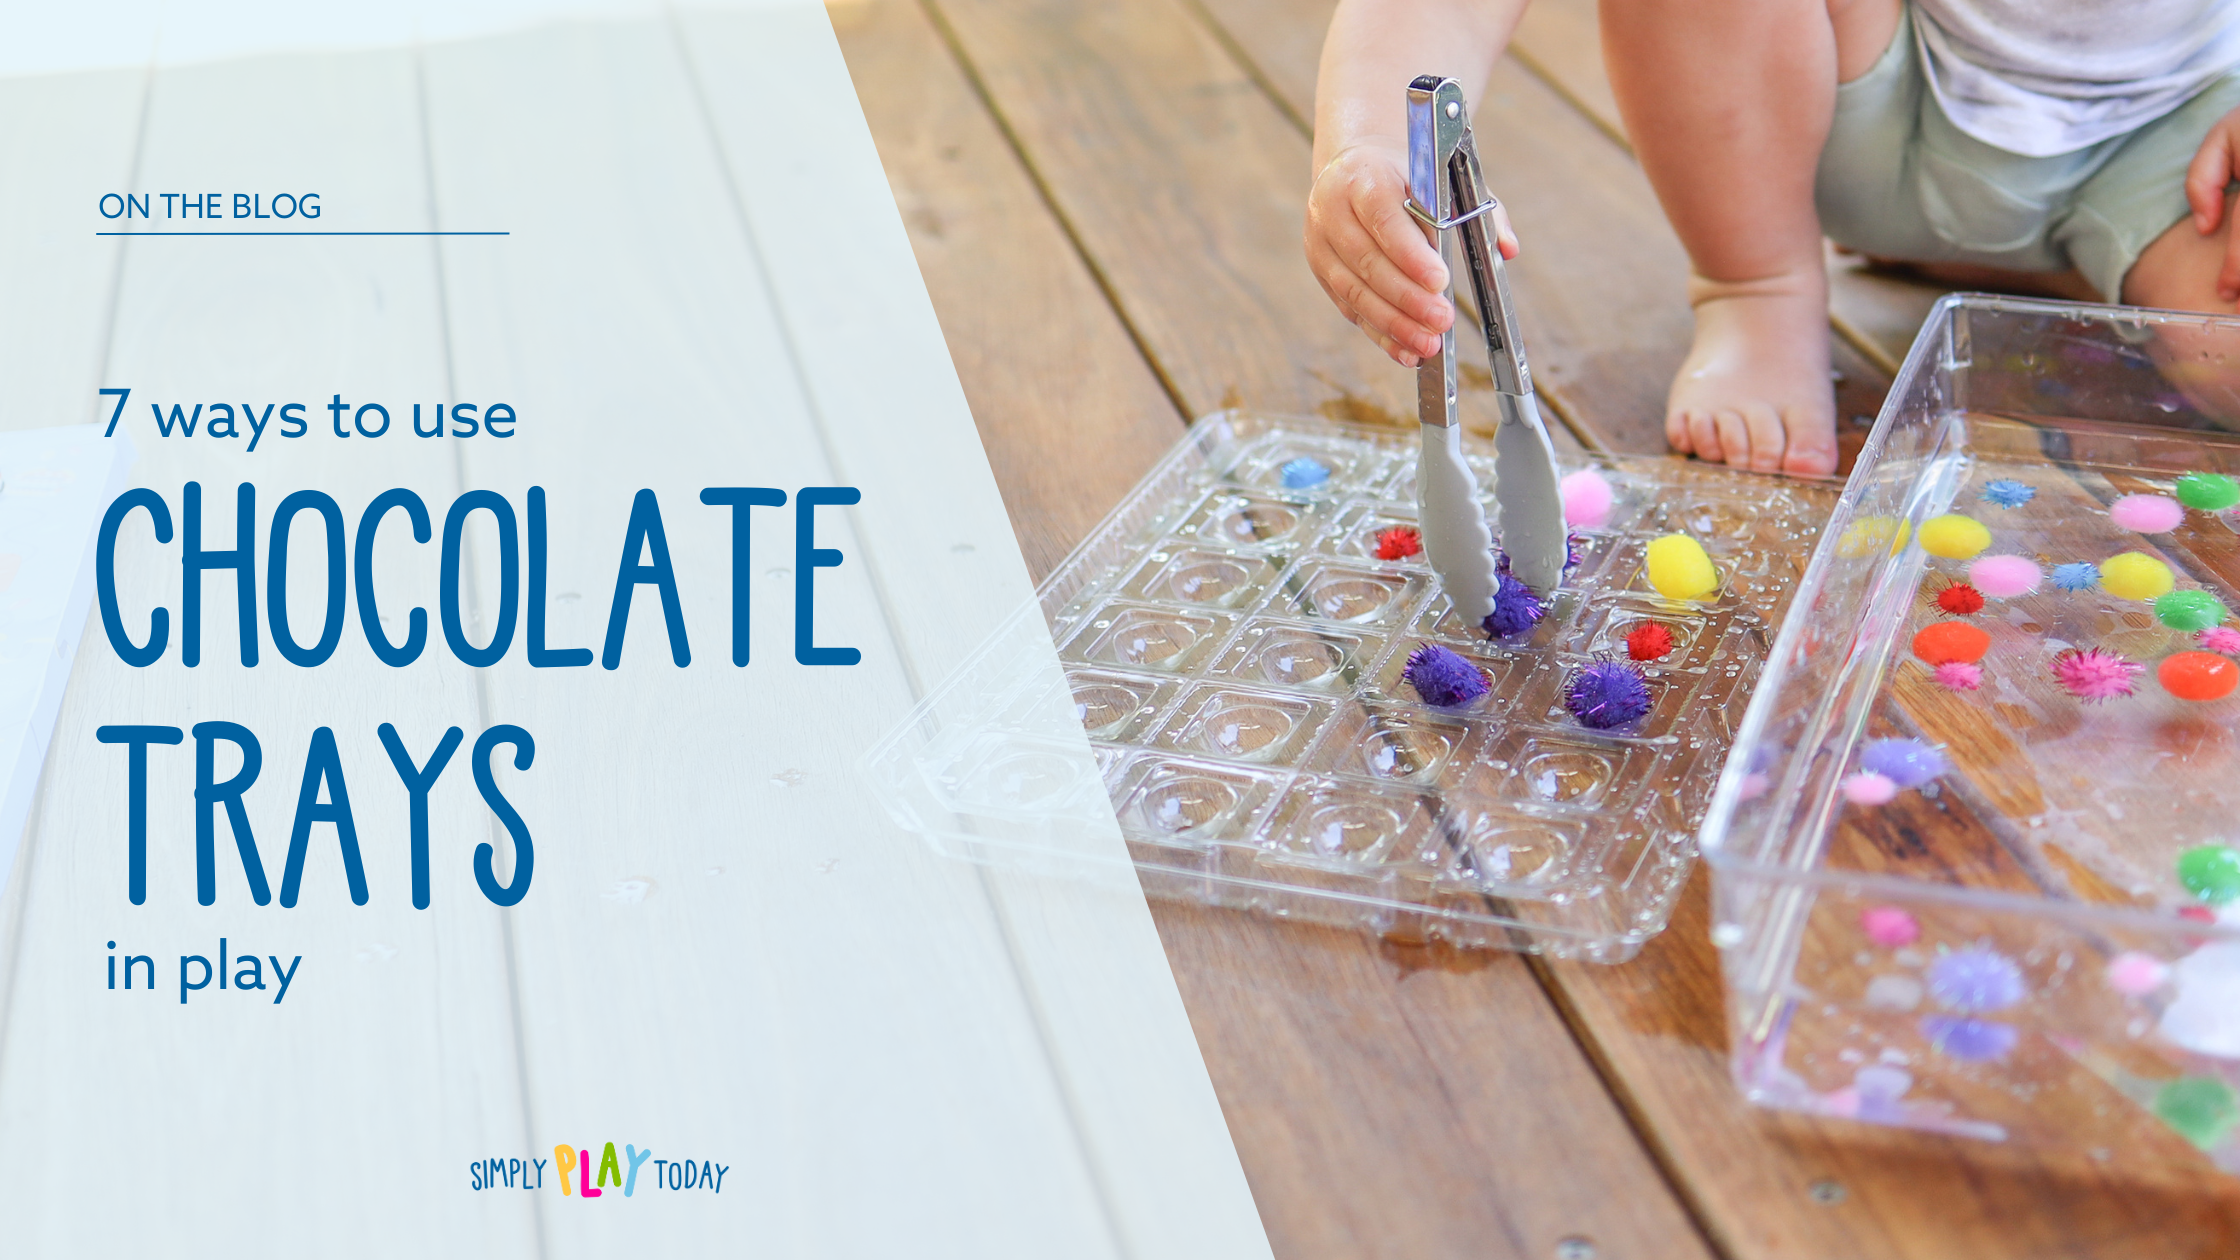 Background photo shows a young child using a pair of tongs to pick up pom poms and place them in a chocolate tray. Text says 'New on the Blog: 7 ways to use chocolate trays in play', and a Simply Play Today logo is at the bottom.